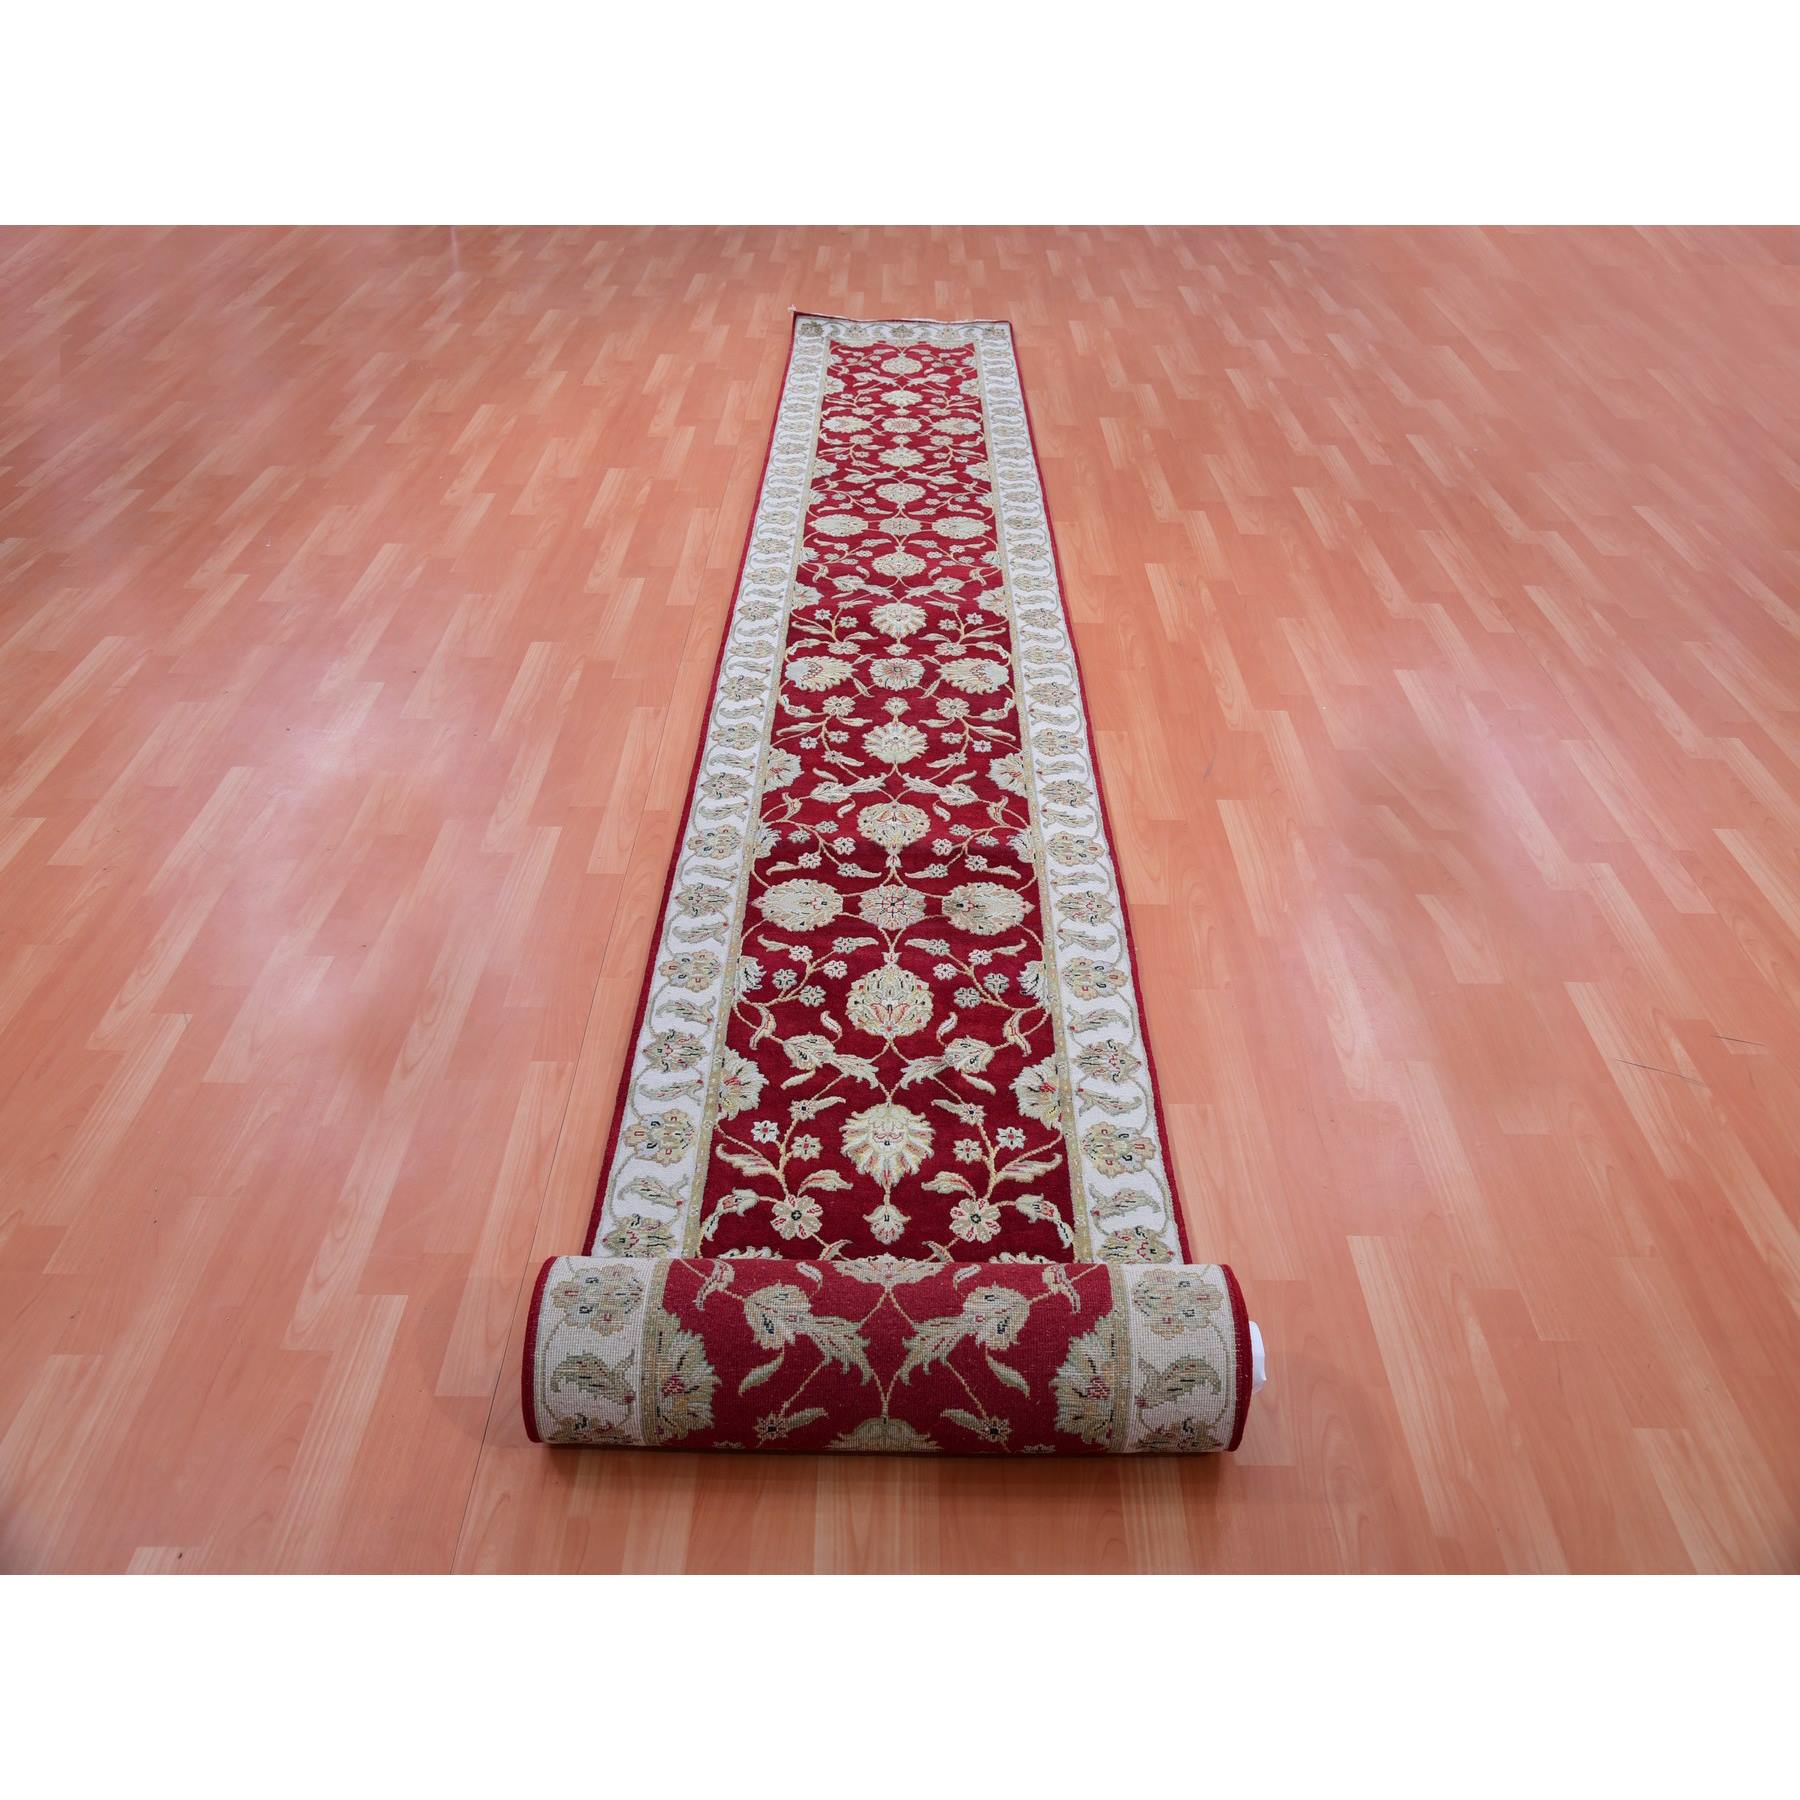 Rajasthan-Hand-Knotted-Rug-376840